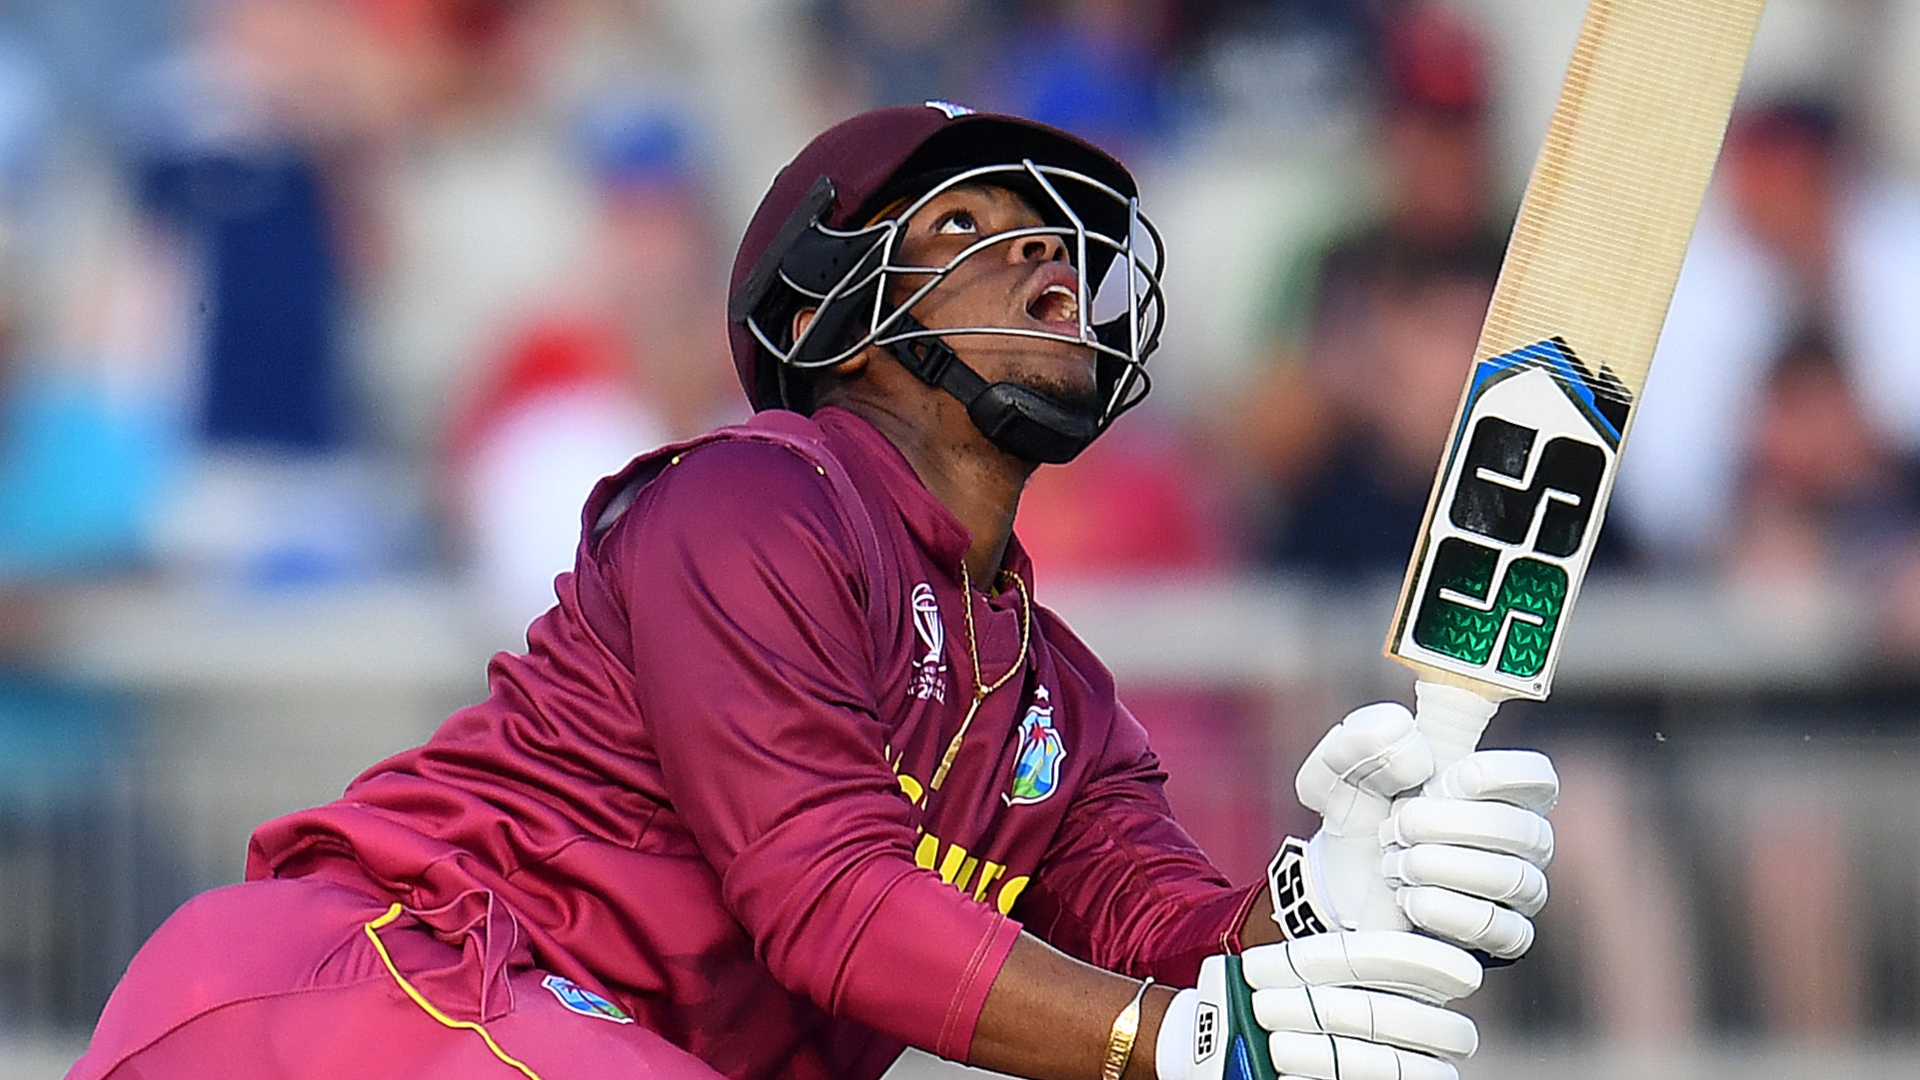 Fears over the coronavirus pandemic have led to three West Indies players withdrawing from selection for the tour to England.